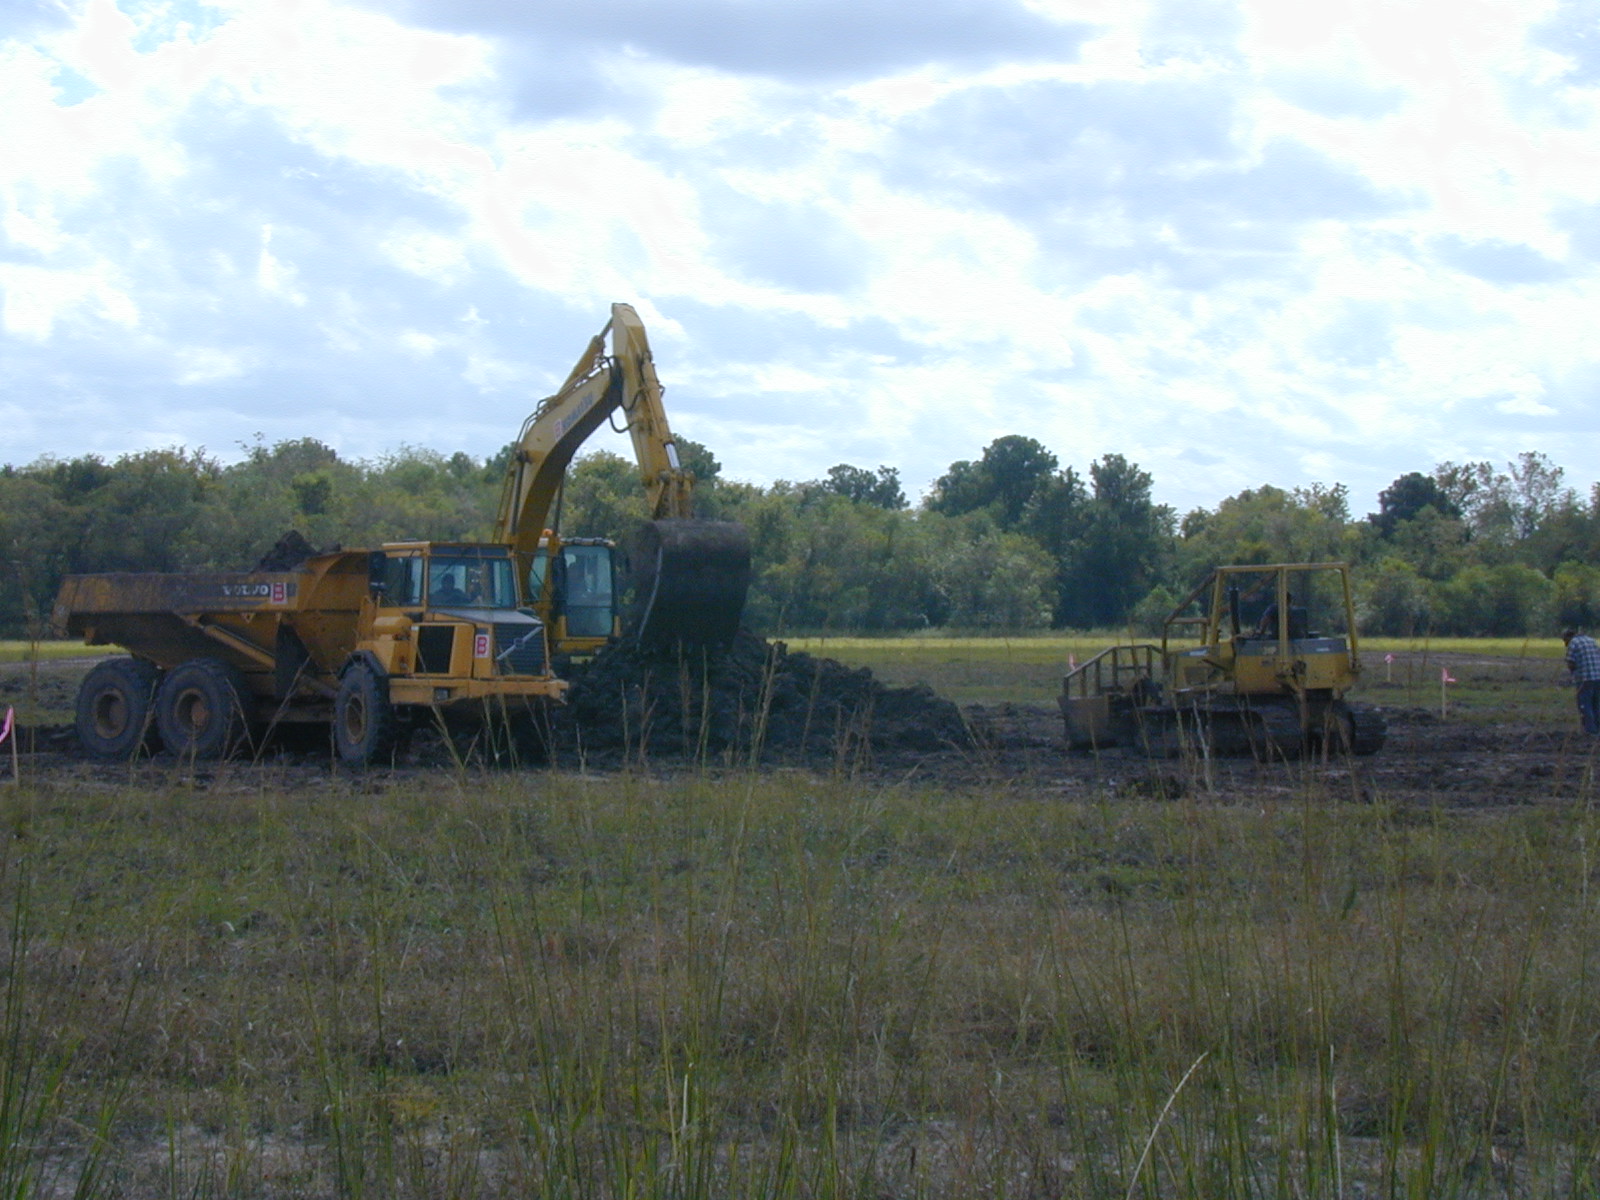 Construction at the Wetland Site